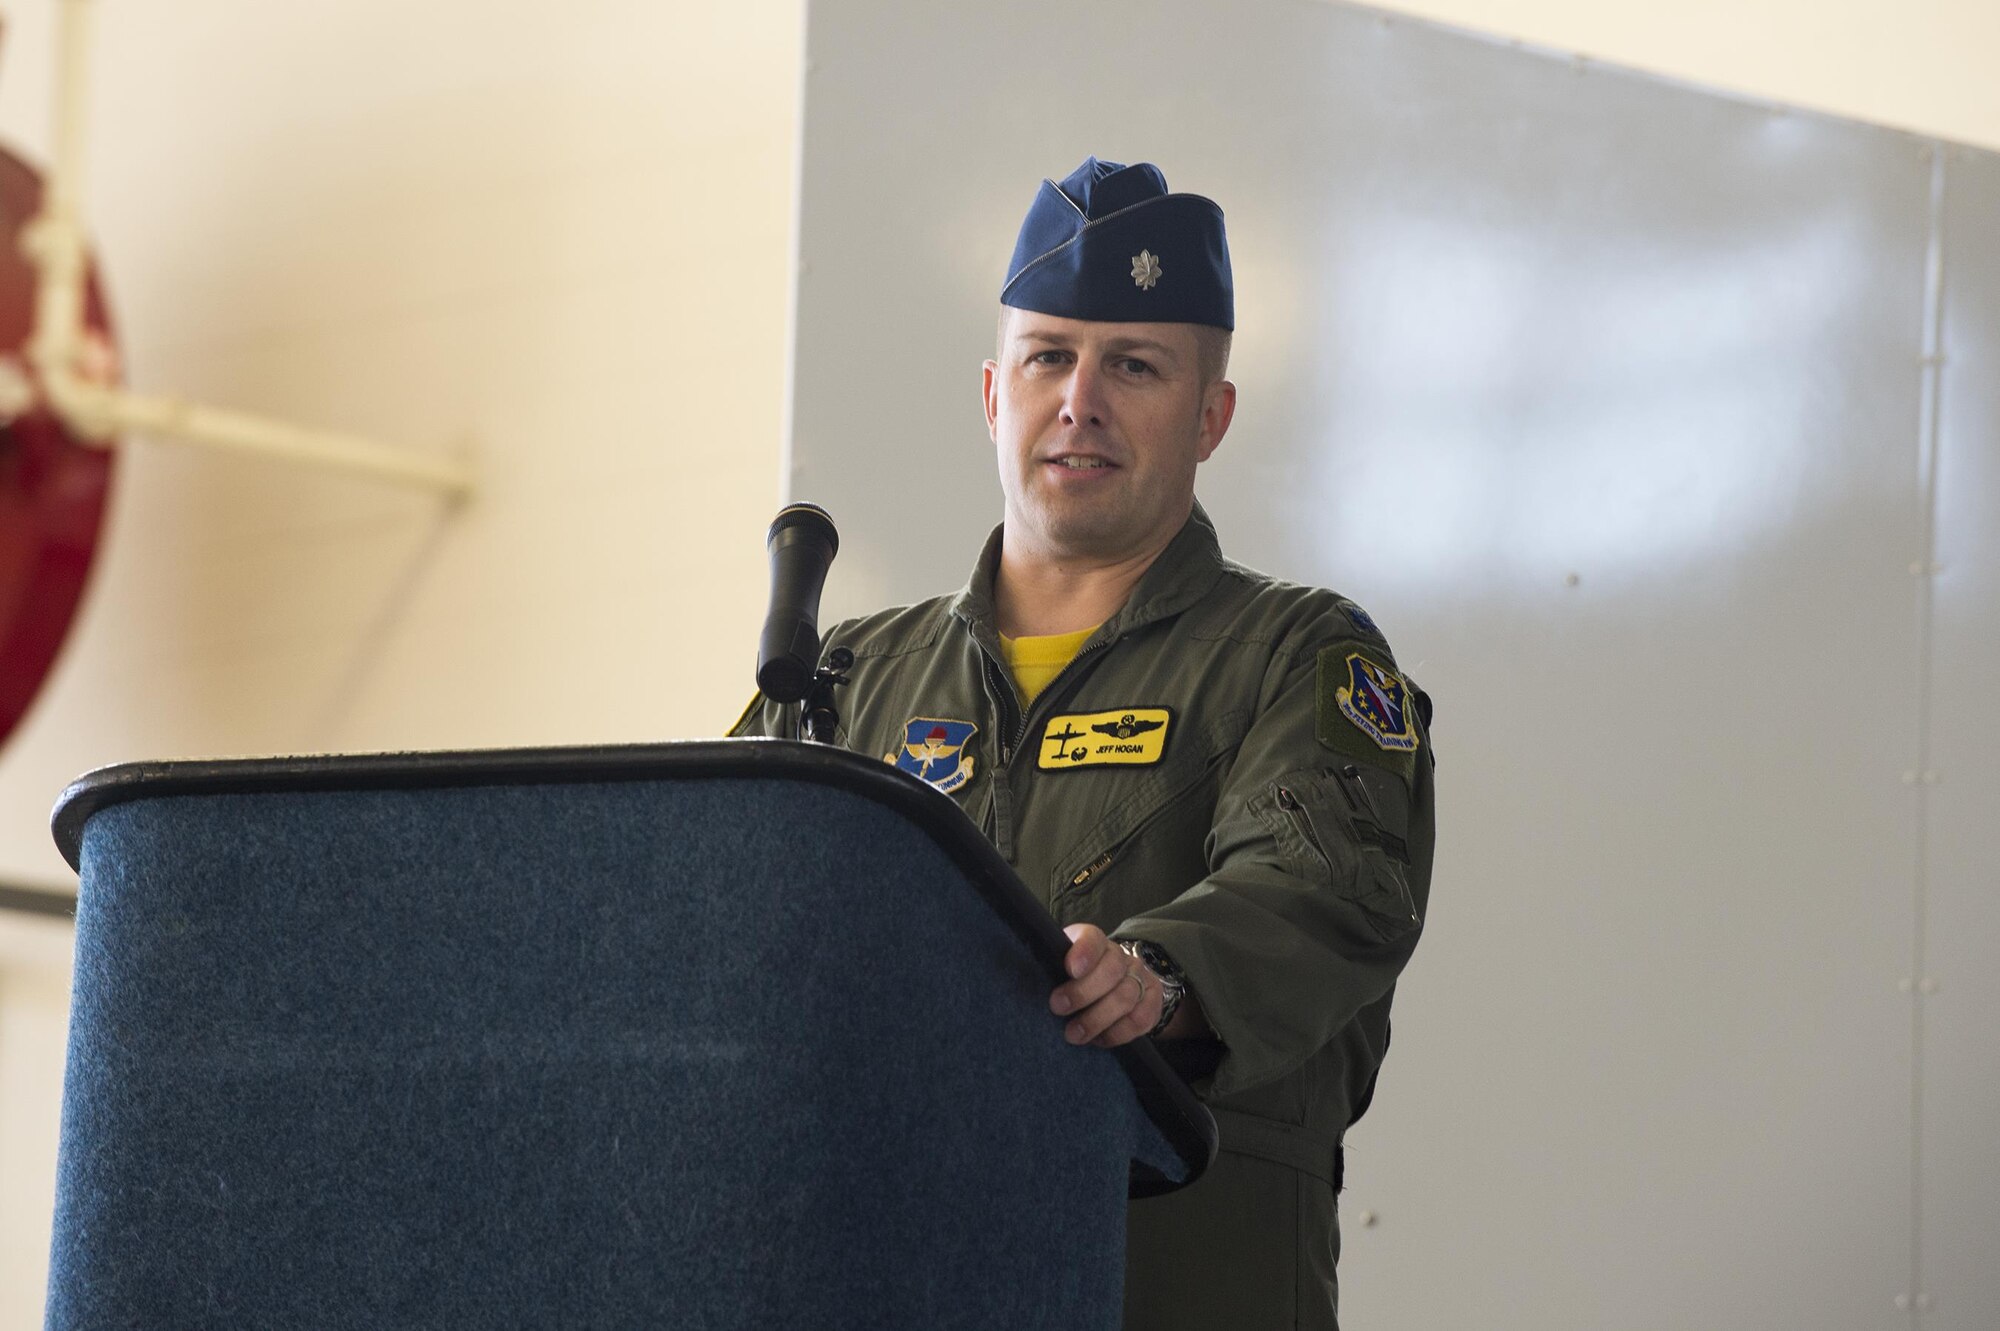 U.S. Air Force Lt. Col. Jeffrey Hogan, 81st Fighter Squadron commander, congratulates the Afghan air force pilots and instructor pilots during the graduation of the 81st Fighter Squadron’s first student pilot class, Dec. 18, 2015, at Moody Air Force Base, Ga. The 81st Fighter Squadron was reactivated in January 2015. (U.S. Air Force photo by Senior Airman Ceaira Tinsley/Released)